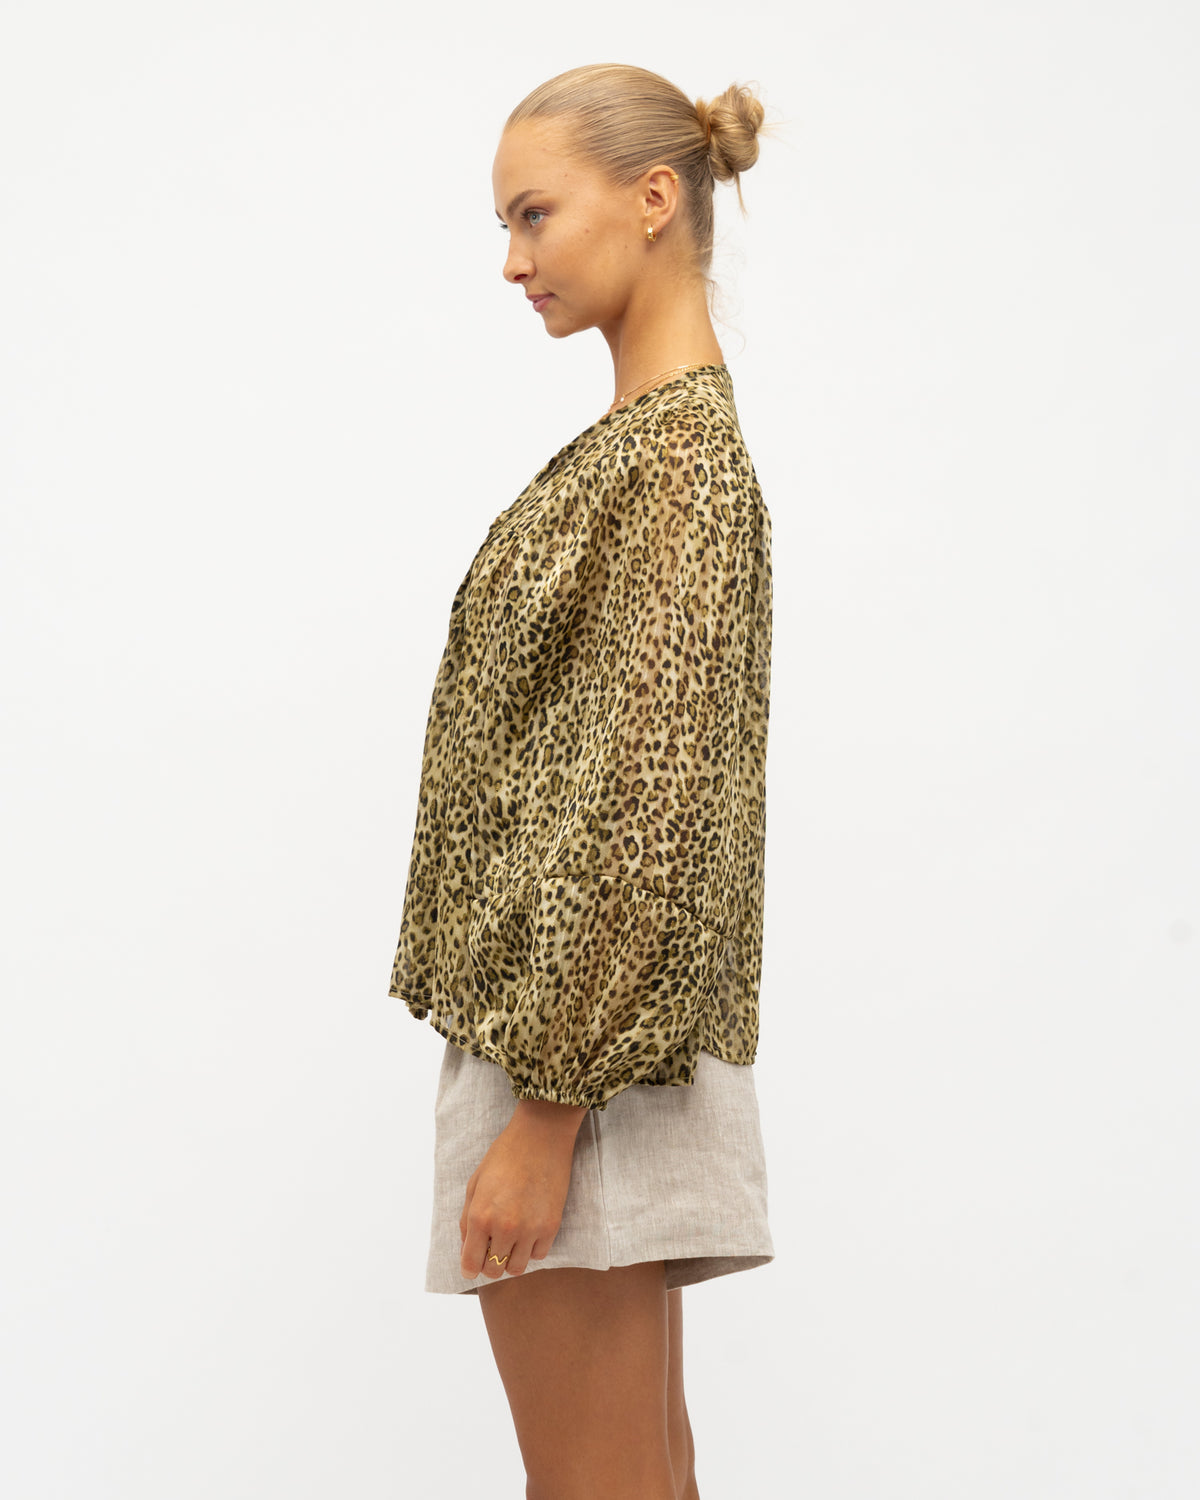 A model wearing an animal print blouse with a tie neckline, blouson sleeves, and elasticated cuffs from the White Closet collection designed by Global Fashion House.